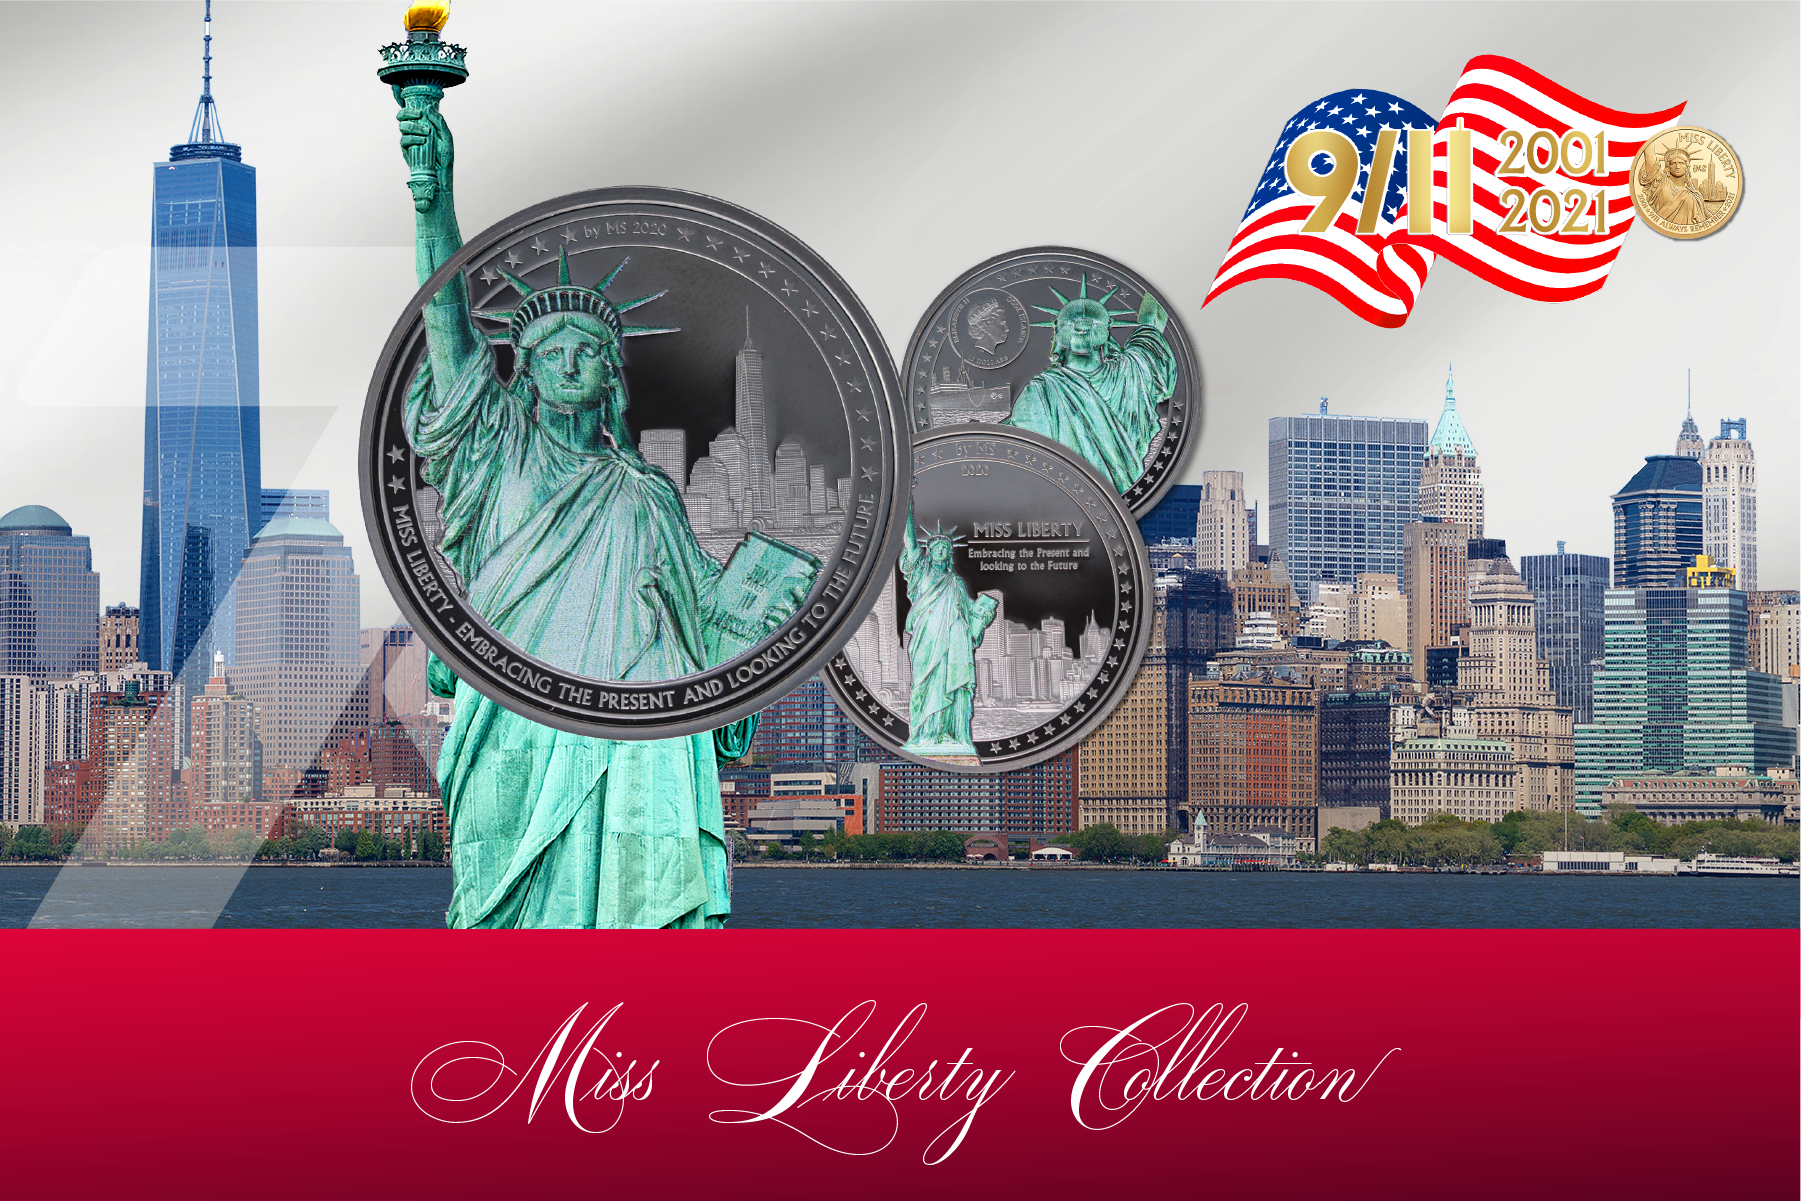 Miles Standish designed Miss Liberty Collection